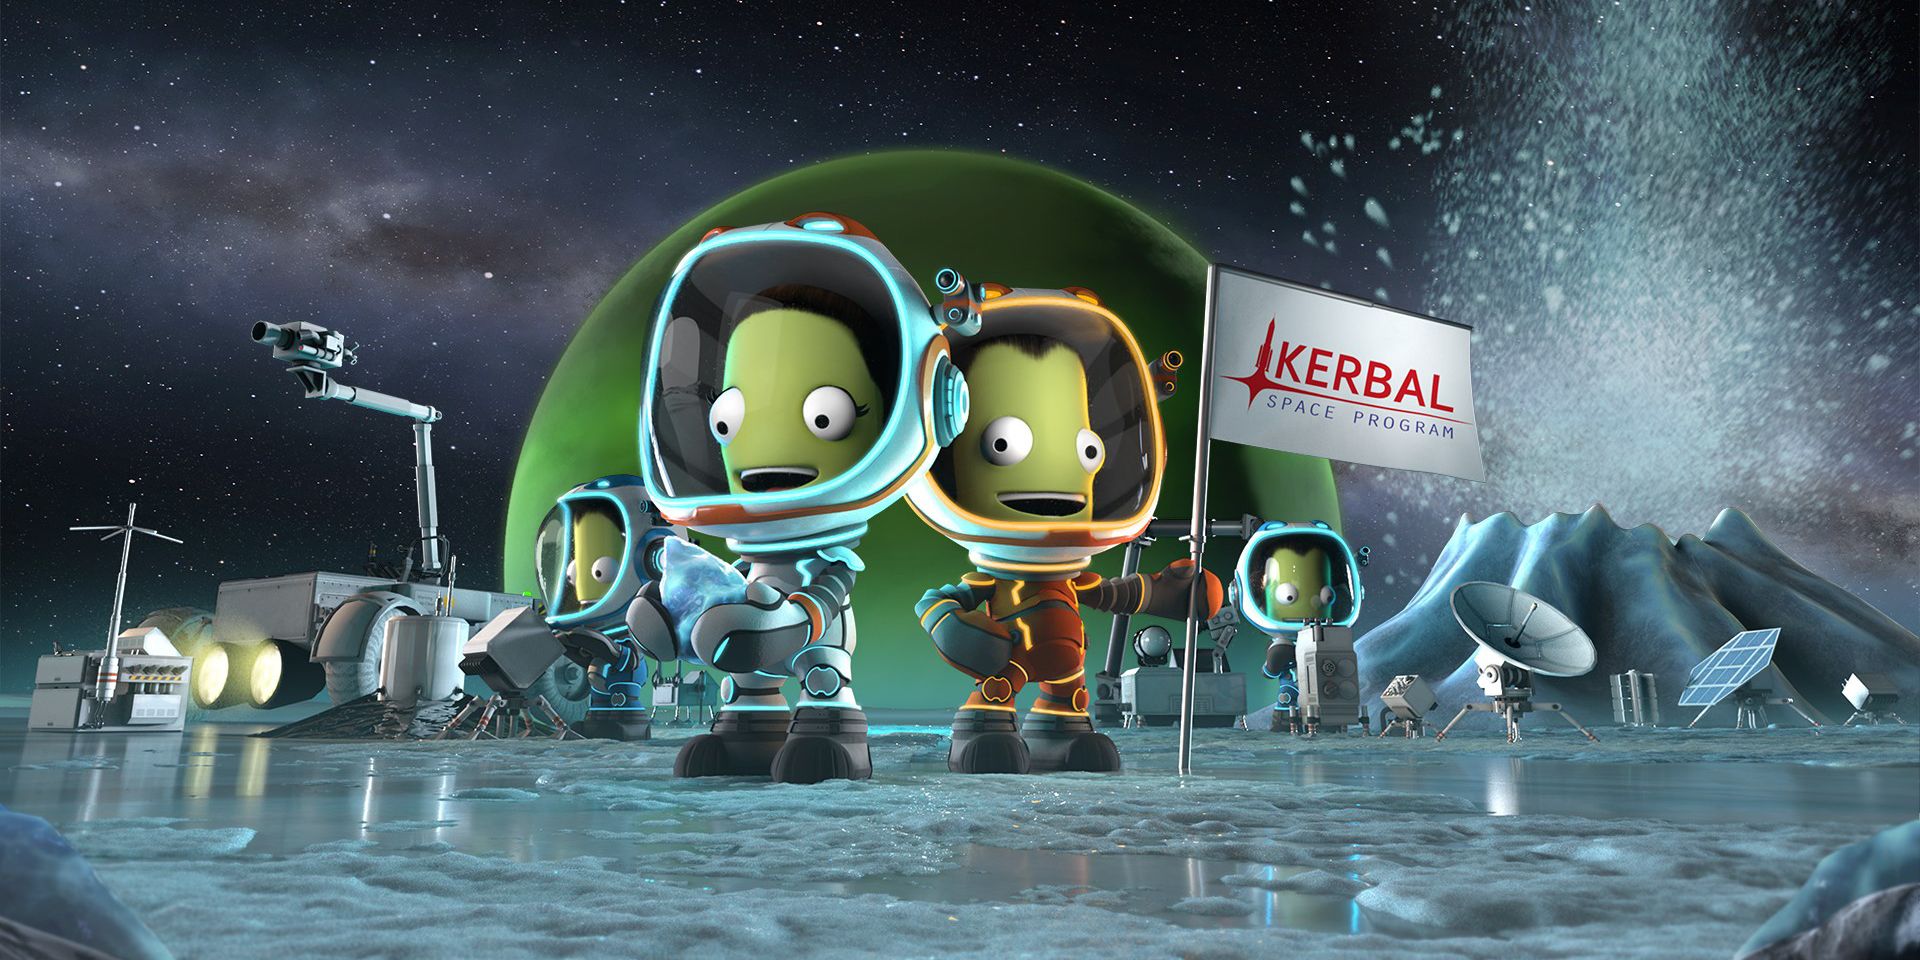 Aliens wearing astronaut suits in the trailer for Kerbal Space Program 2.